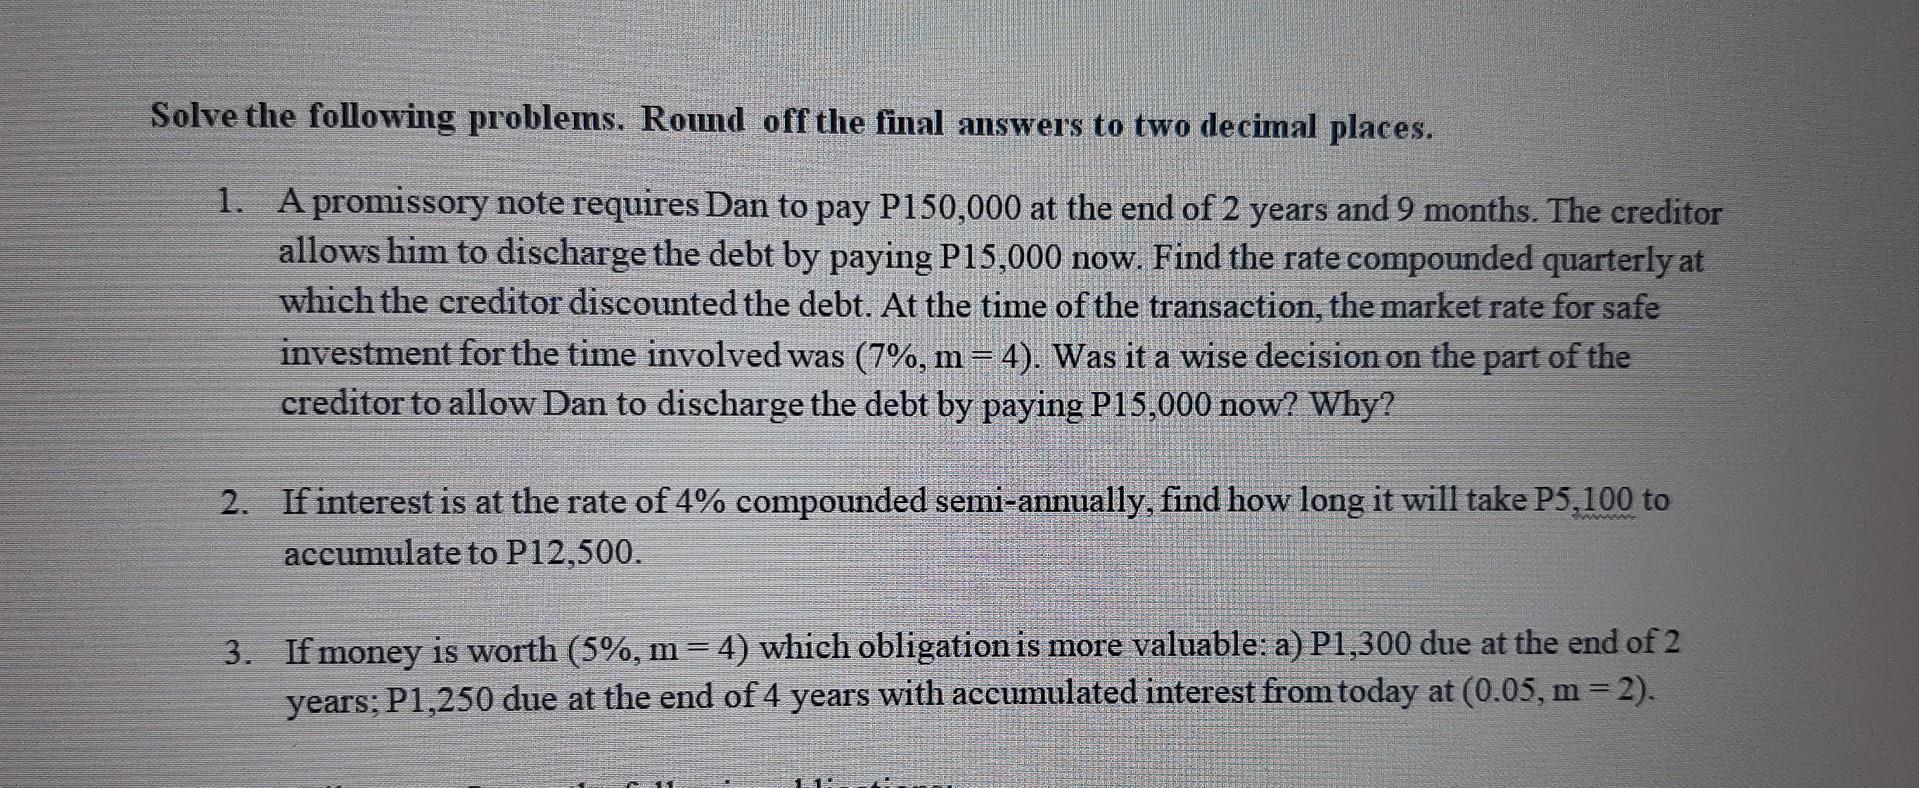 1. A promissory note requires Dan to pay ( P 150,000 ) at the end of 2 years and 9 months. The creditor allows him to disch